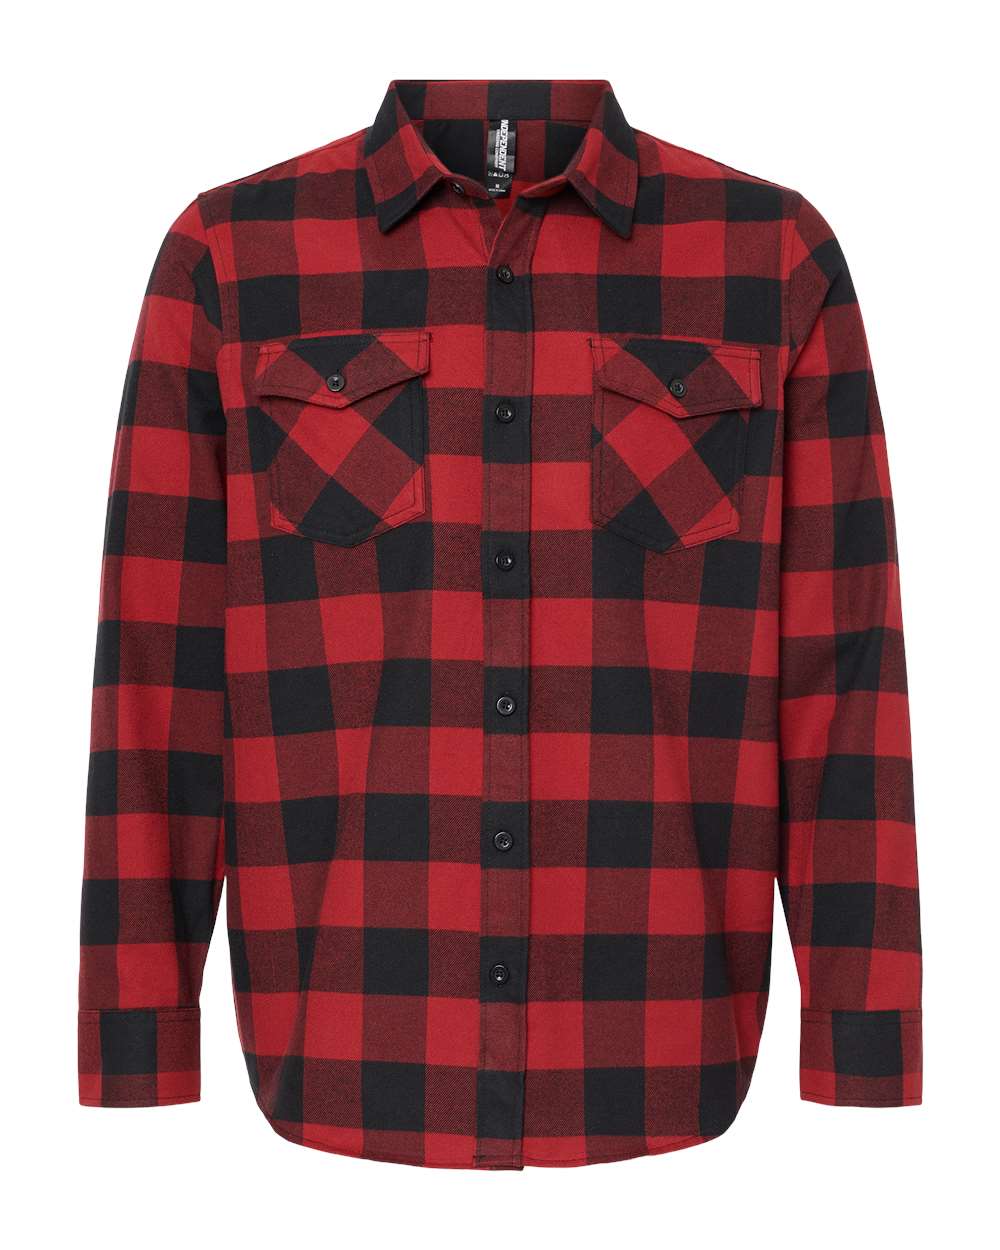 independent trading co flannel shirt red black